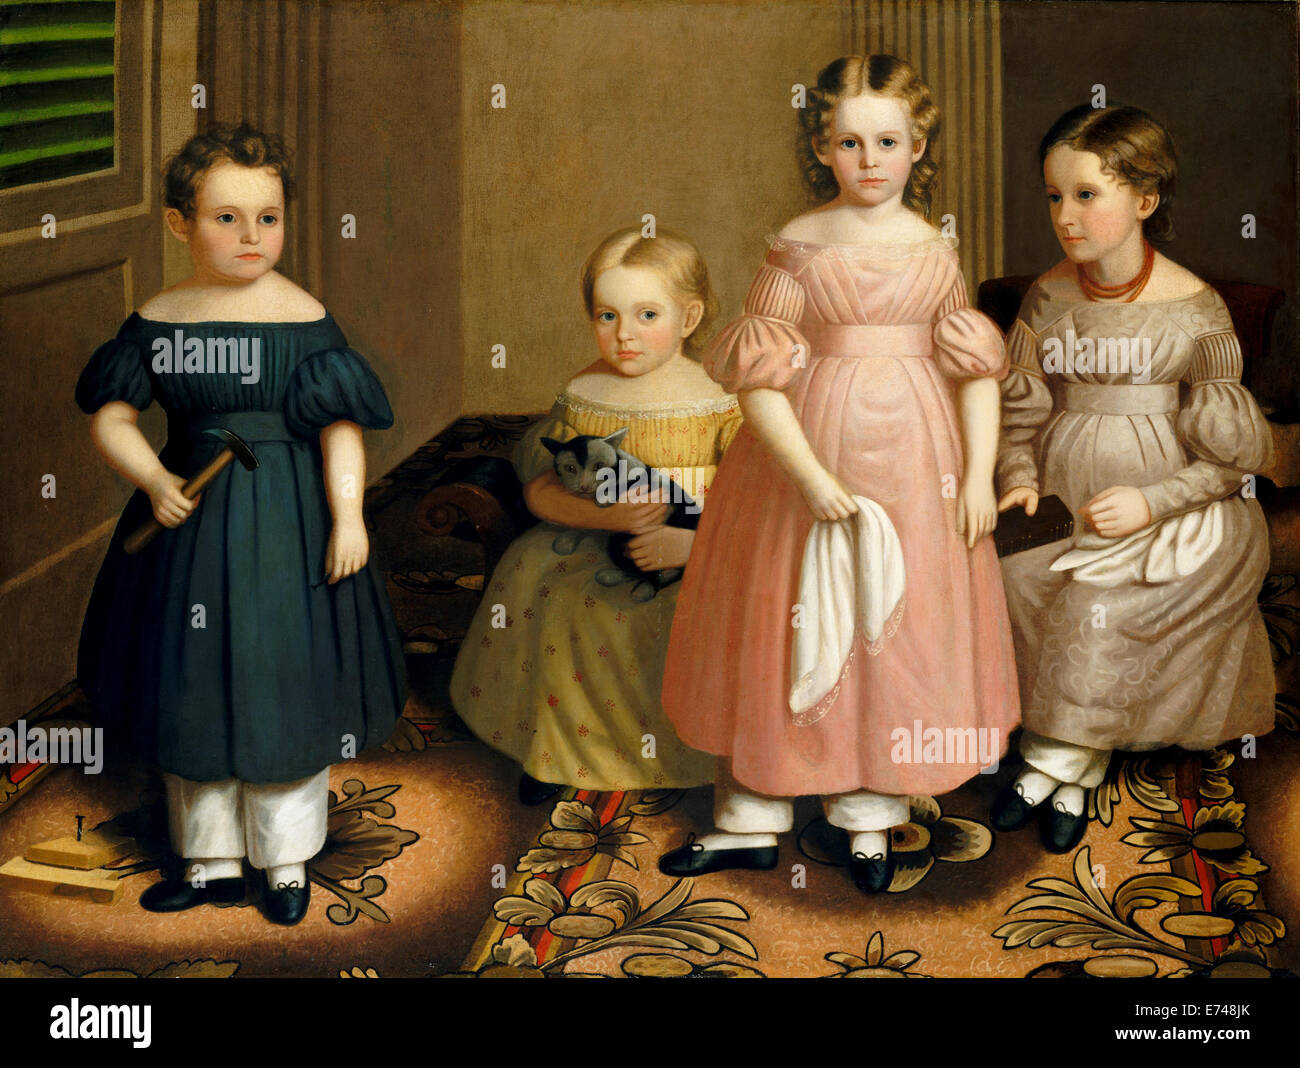 The Alling Children - by Oliver Tarbell Eddy, 1839 Stock Photo